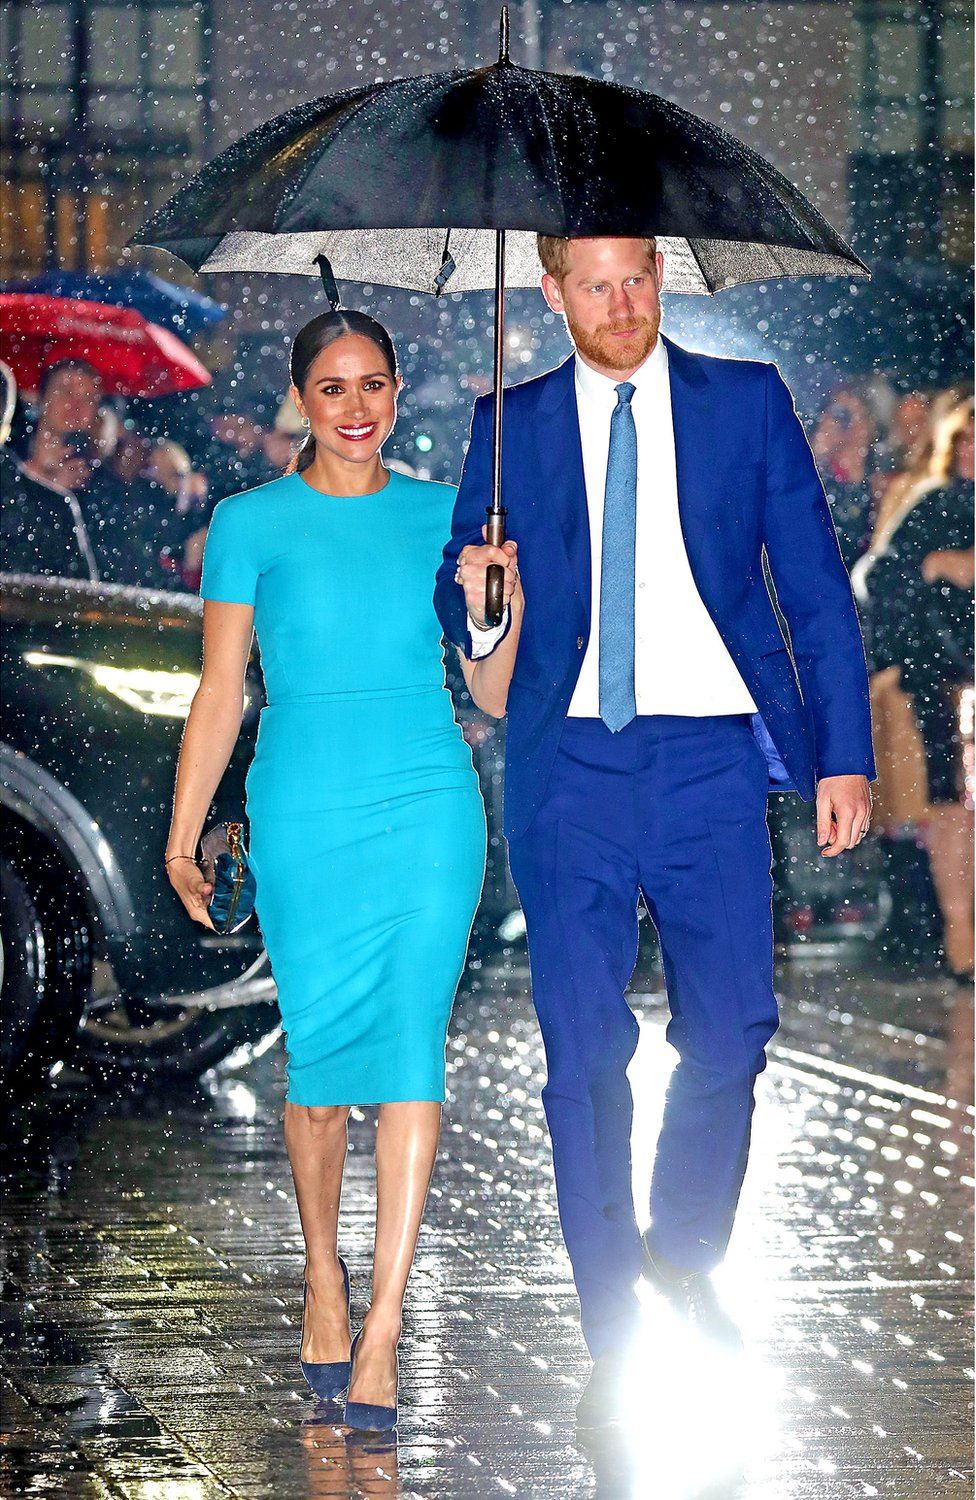 Prince Harry, Duke of Sussex and Meghan, Duchess of Sussex attend The Endeavour Fund Awards at Mansion House